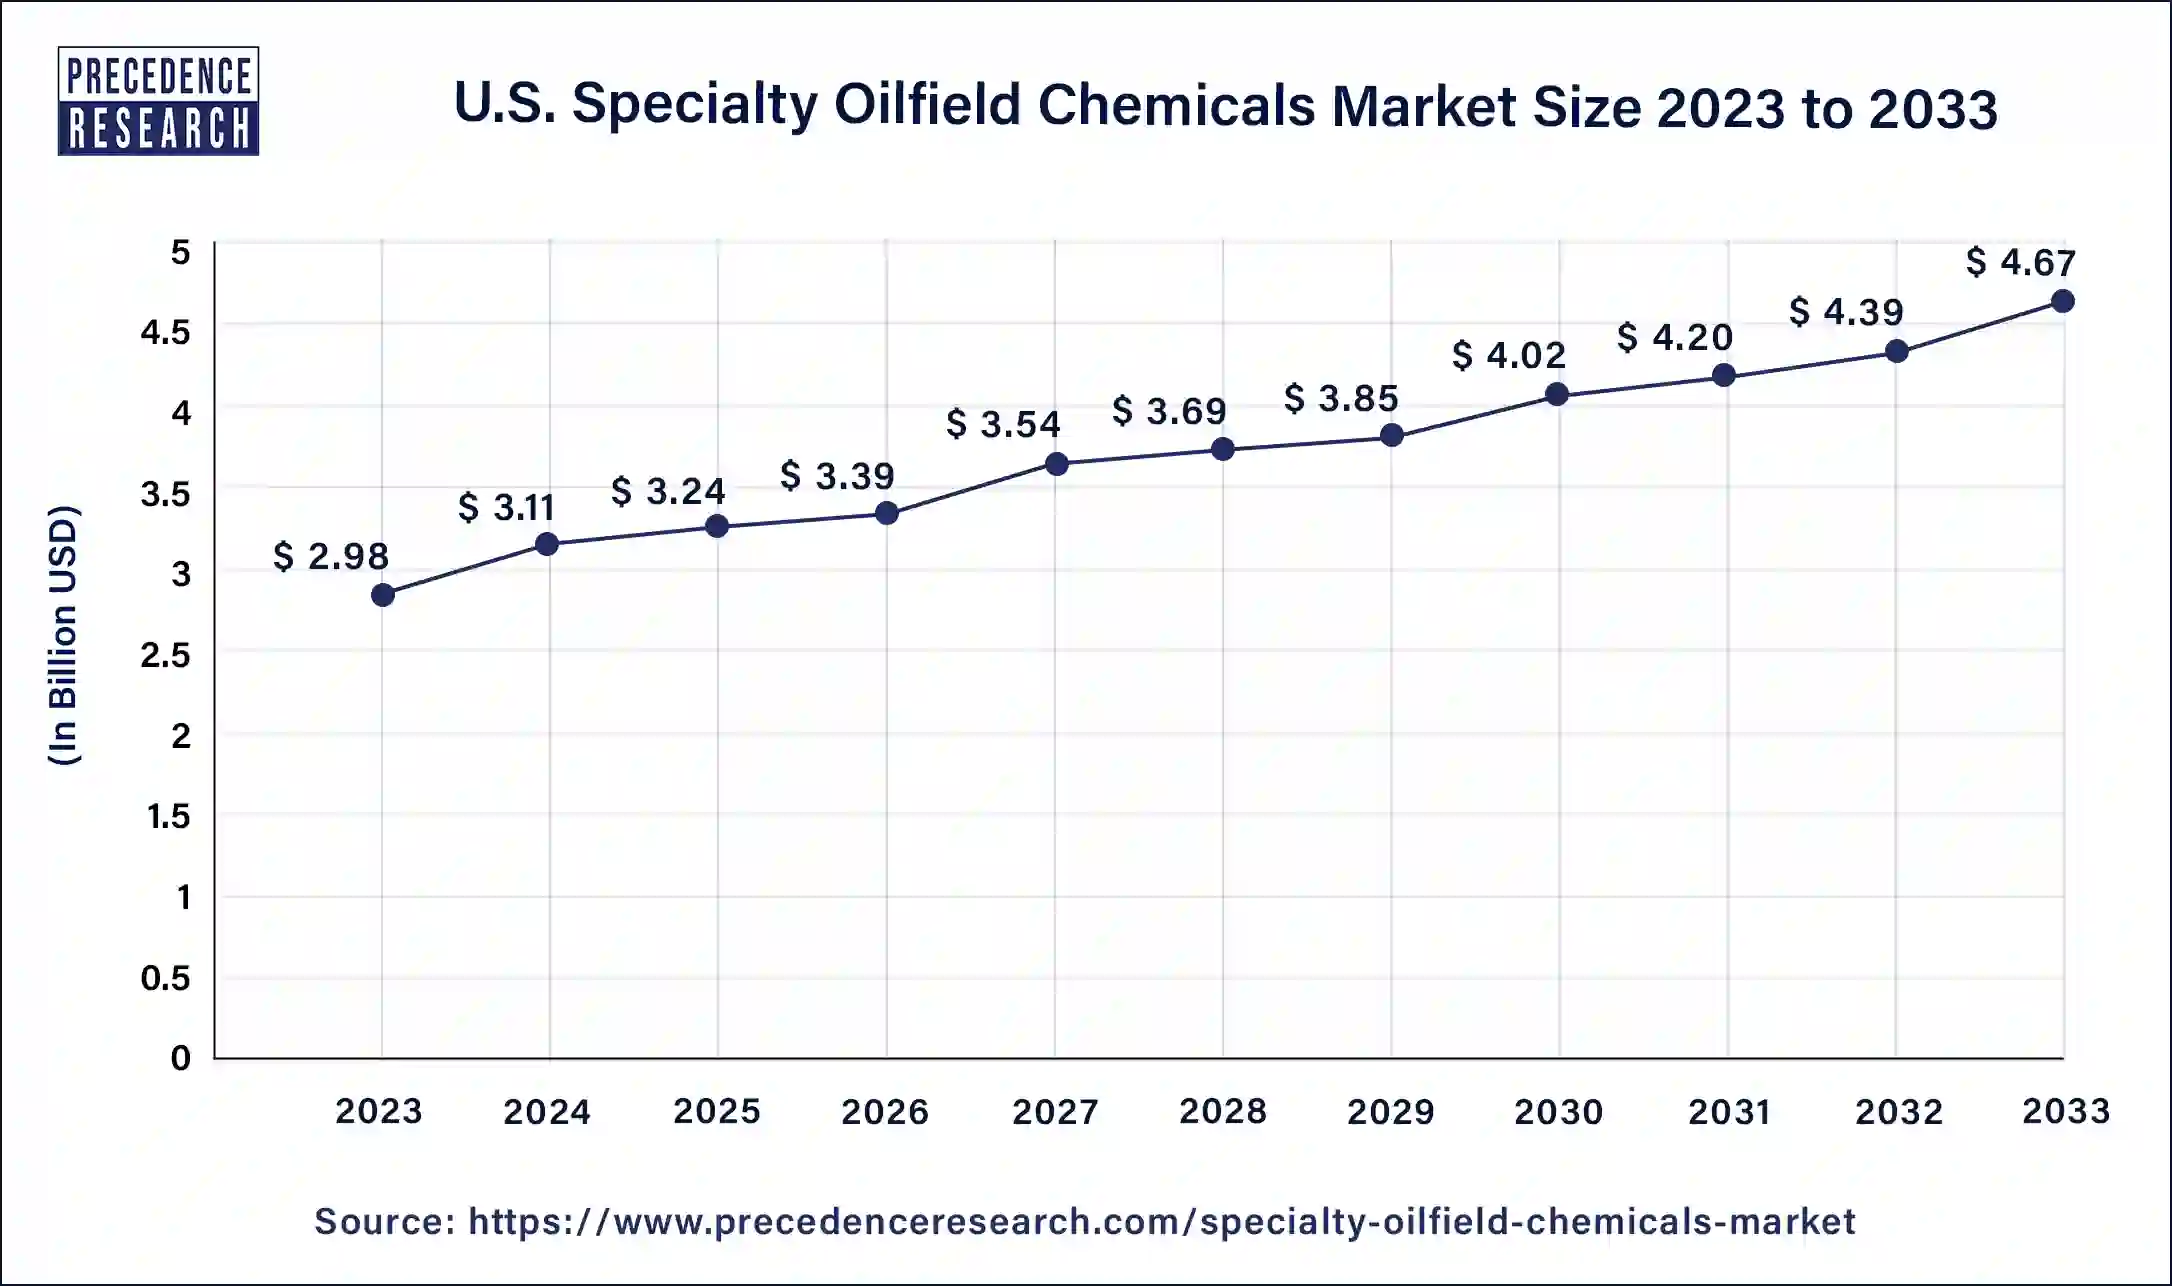 U.S. Specialty Oilfield Chemicals Market Size 2024 to 2033